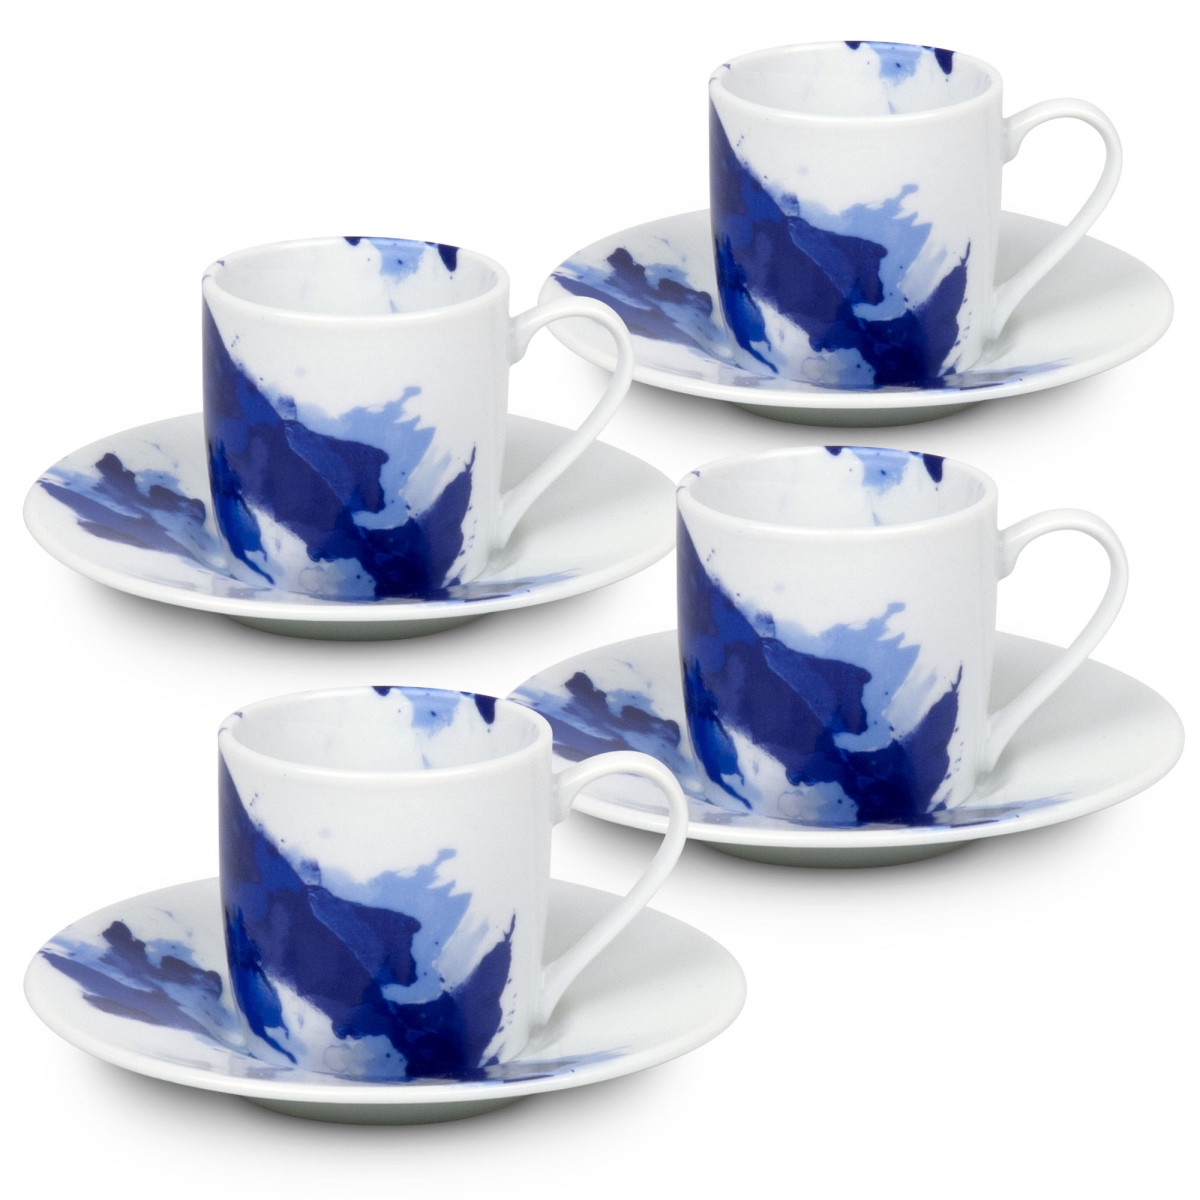 44 5 053 2252 Seeing Espresso Cups -set Of 4